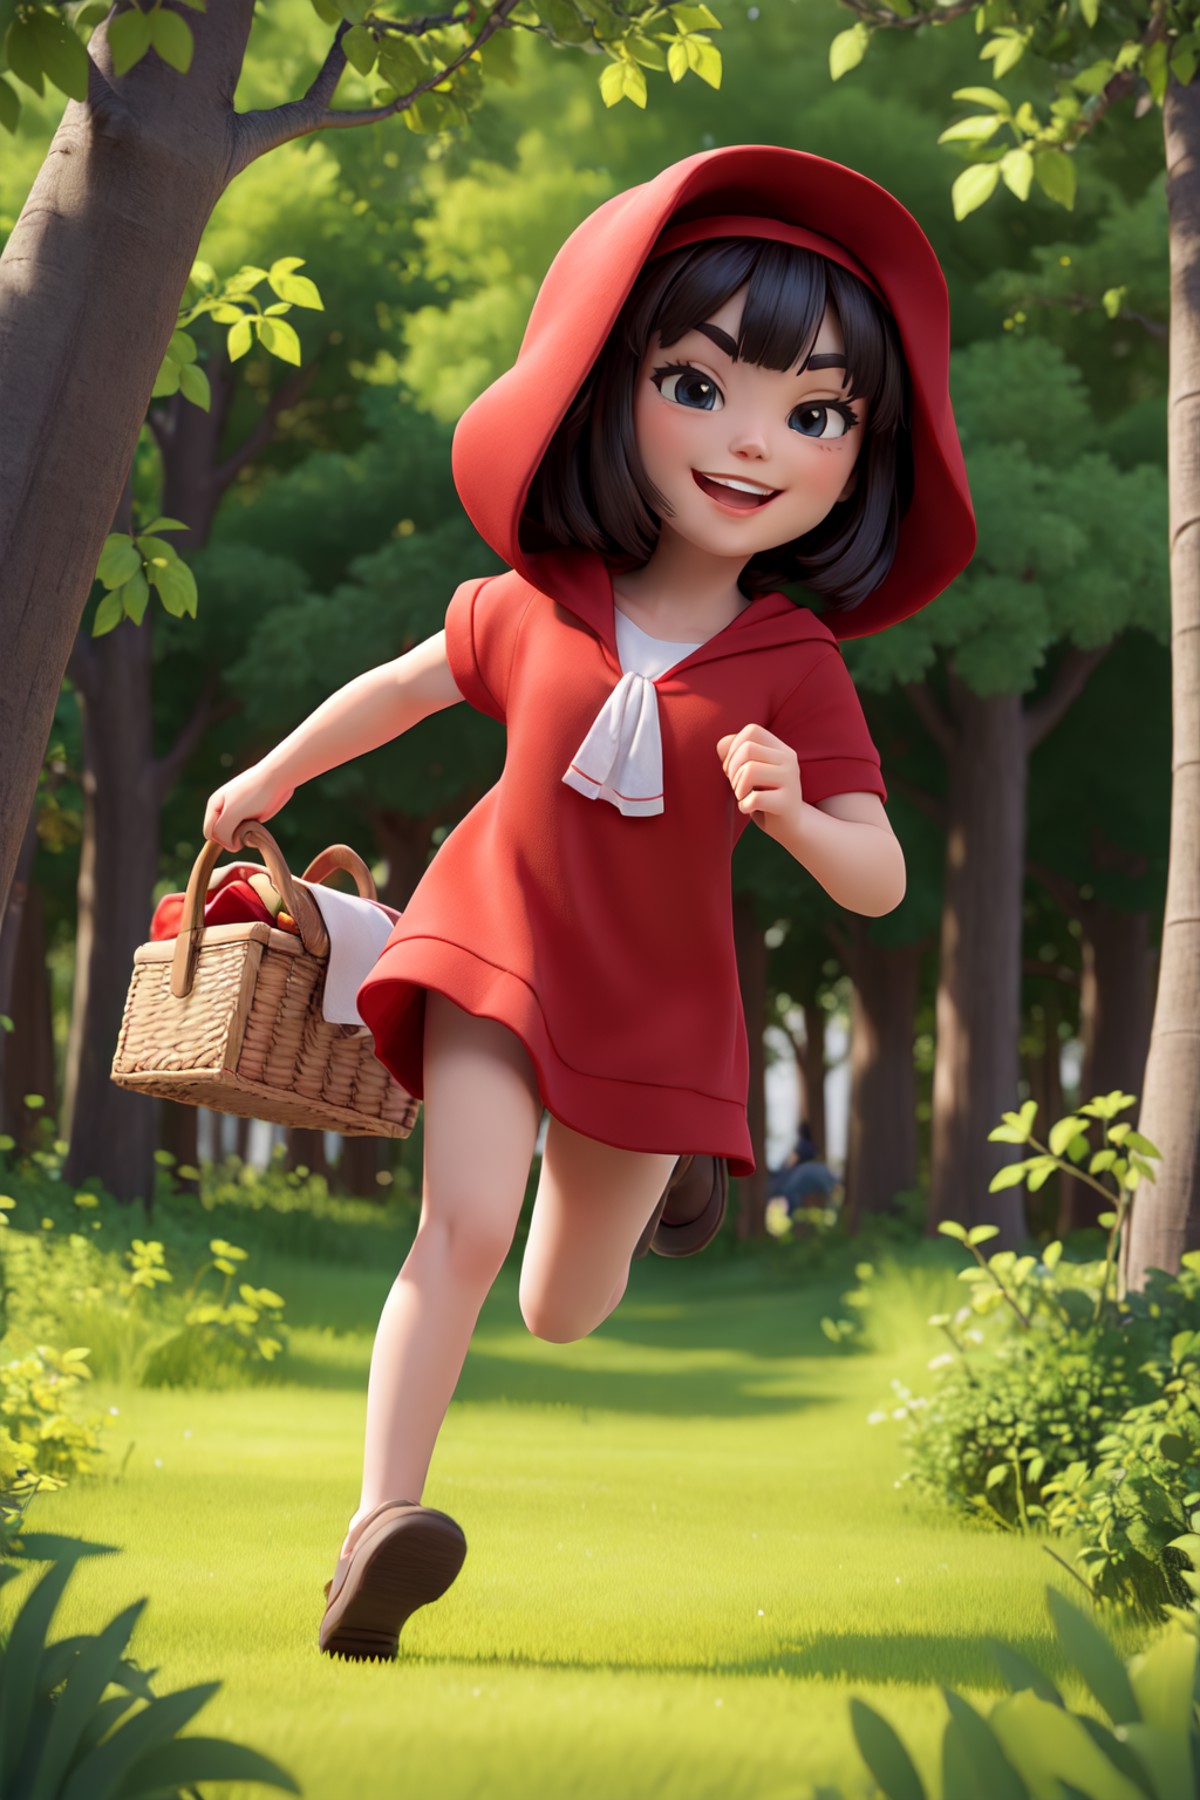 masterpiece, best quality,red riding hood running with a picnic basket, big smile, forest background